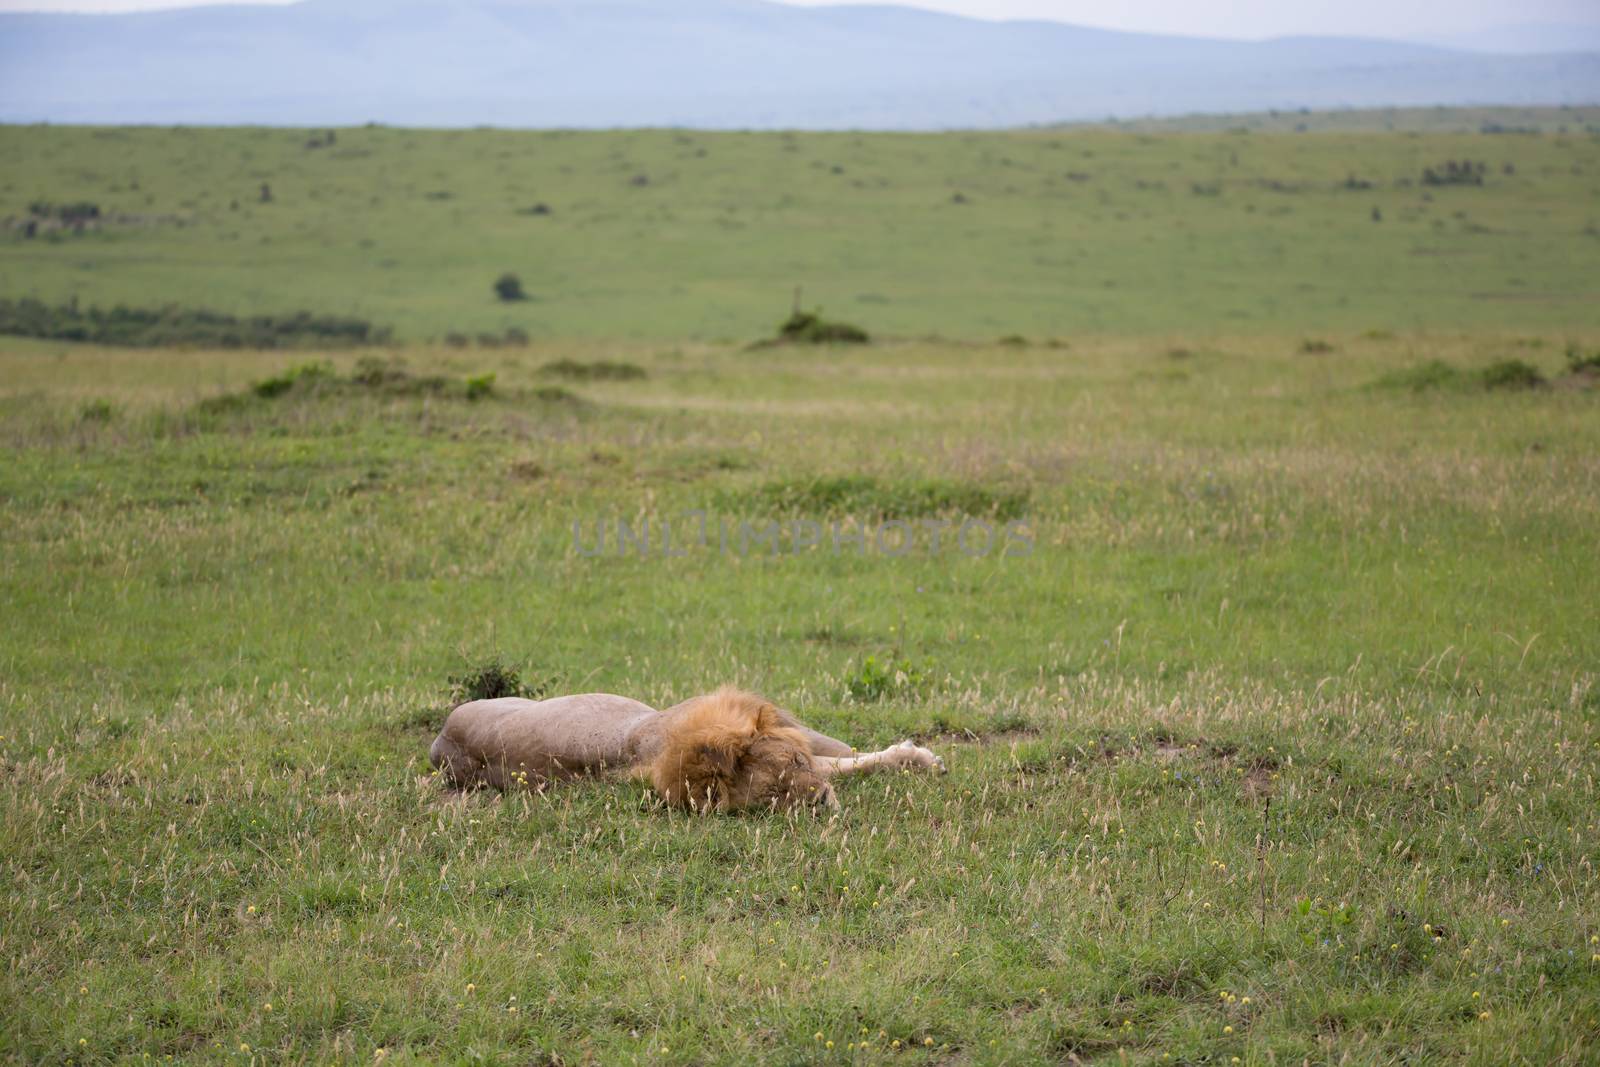 One big lion lies in the grass in the savanna of Kenya